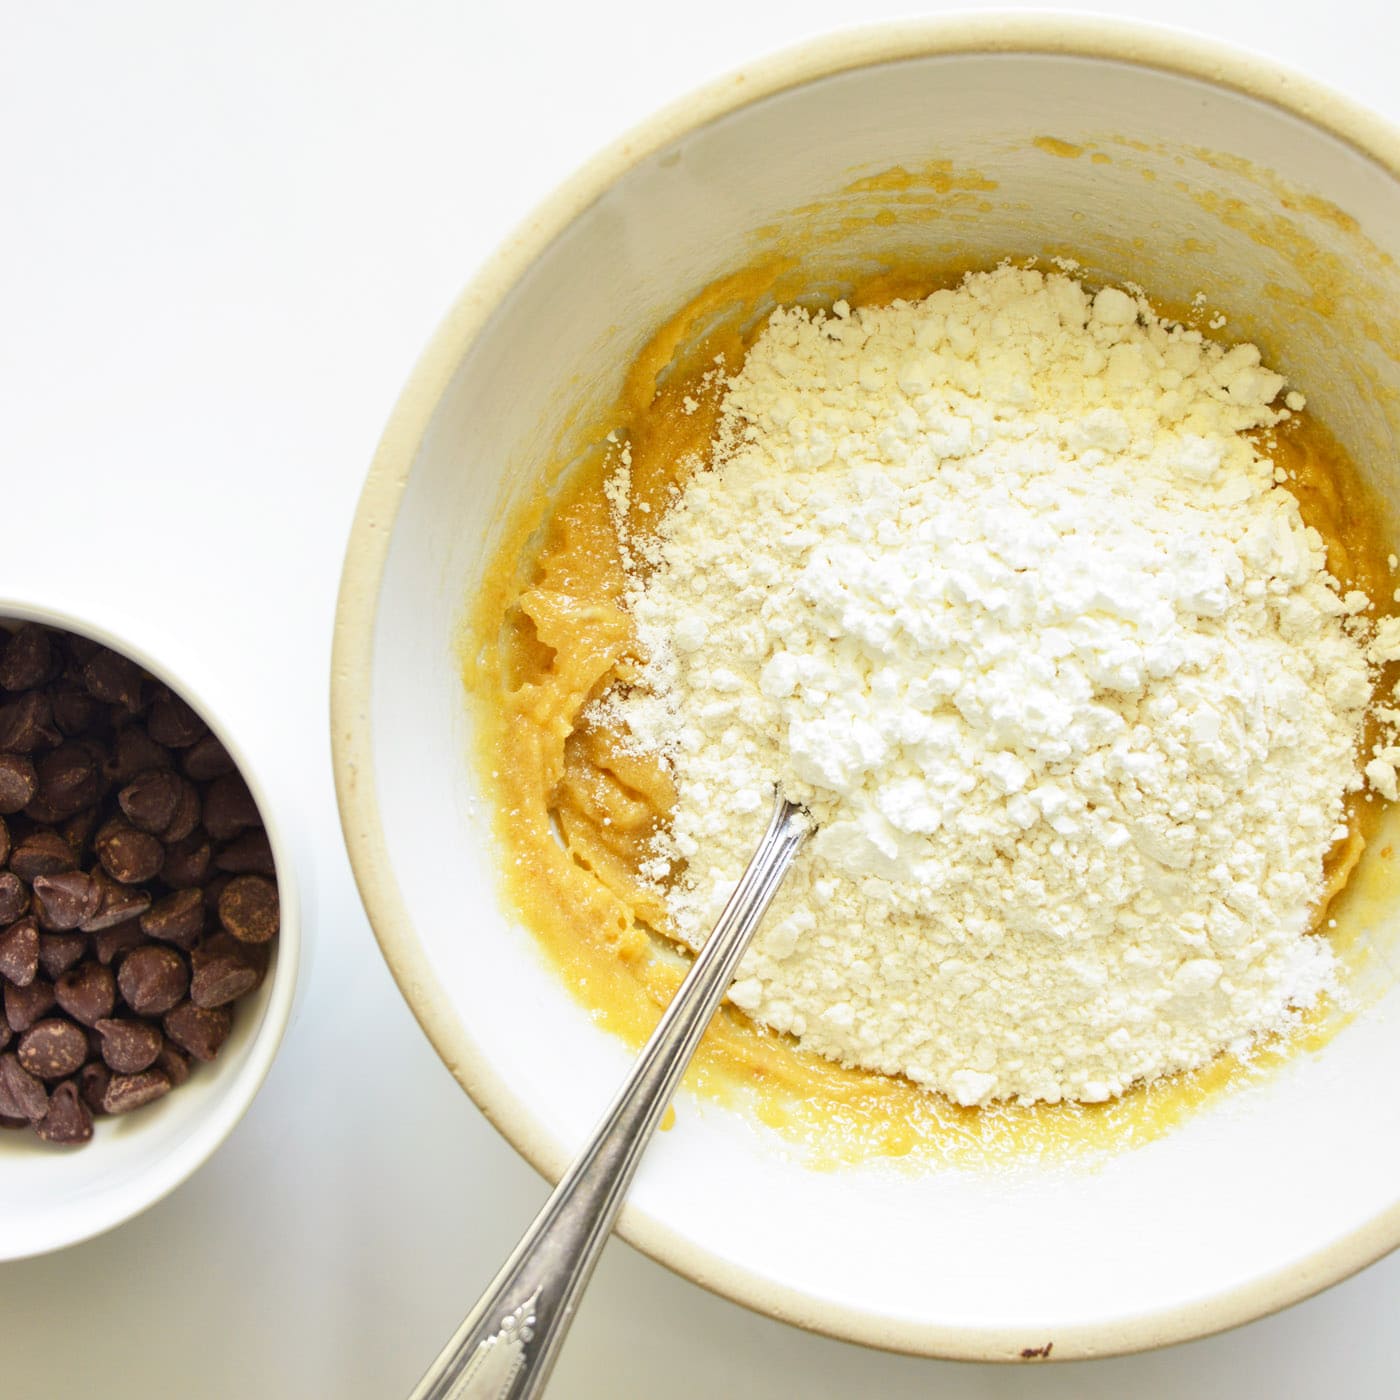 flour, cornstarch, and baking soda added to cookie dough